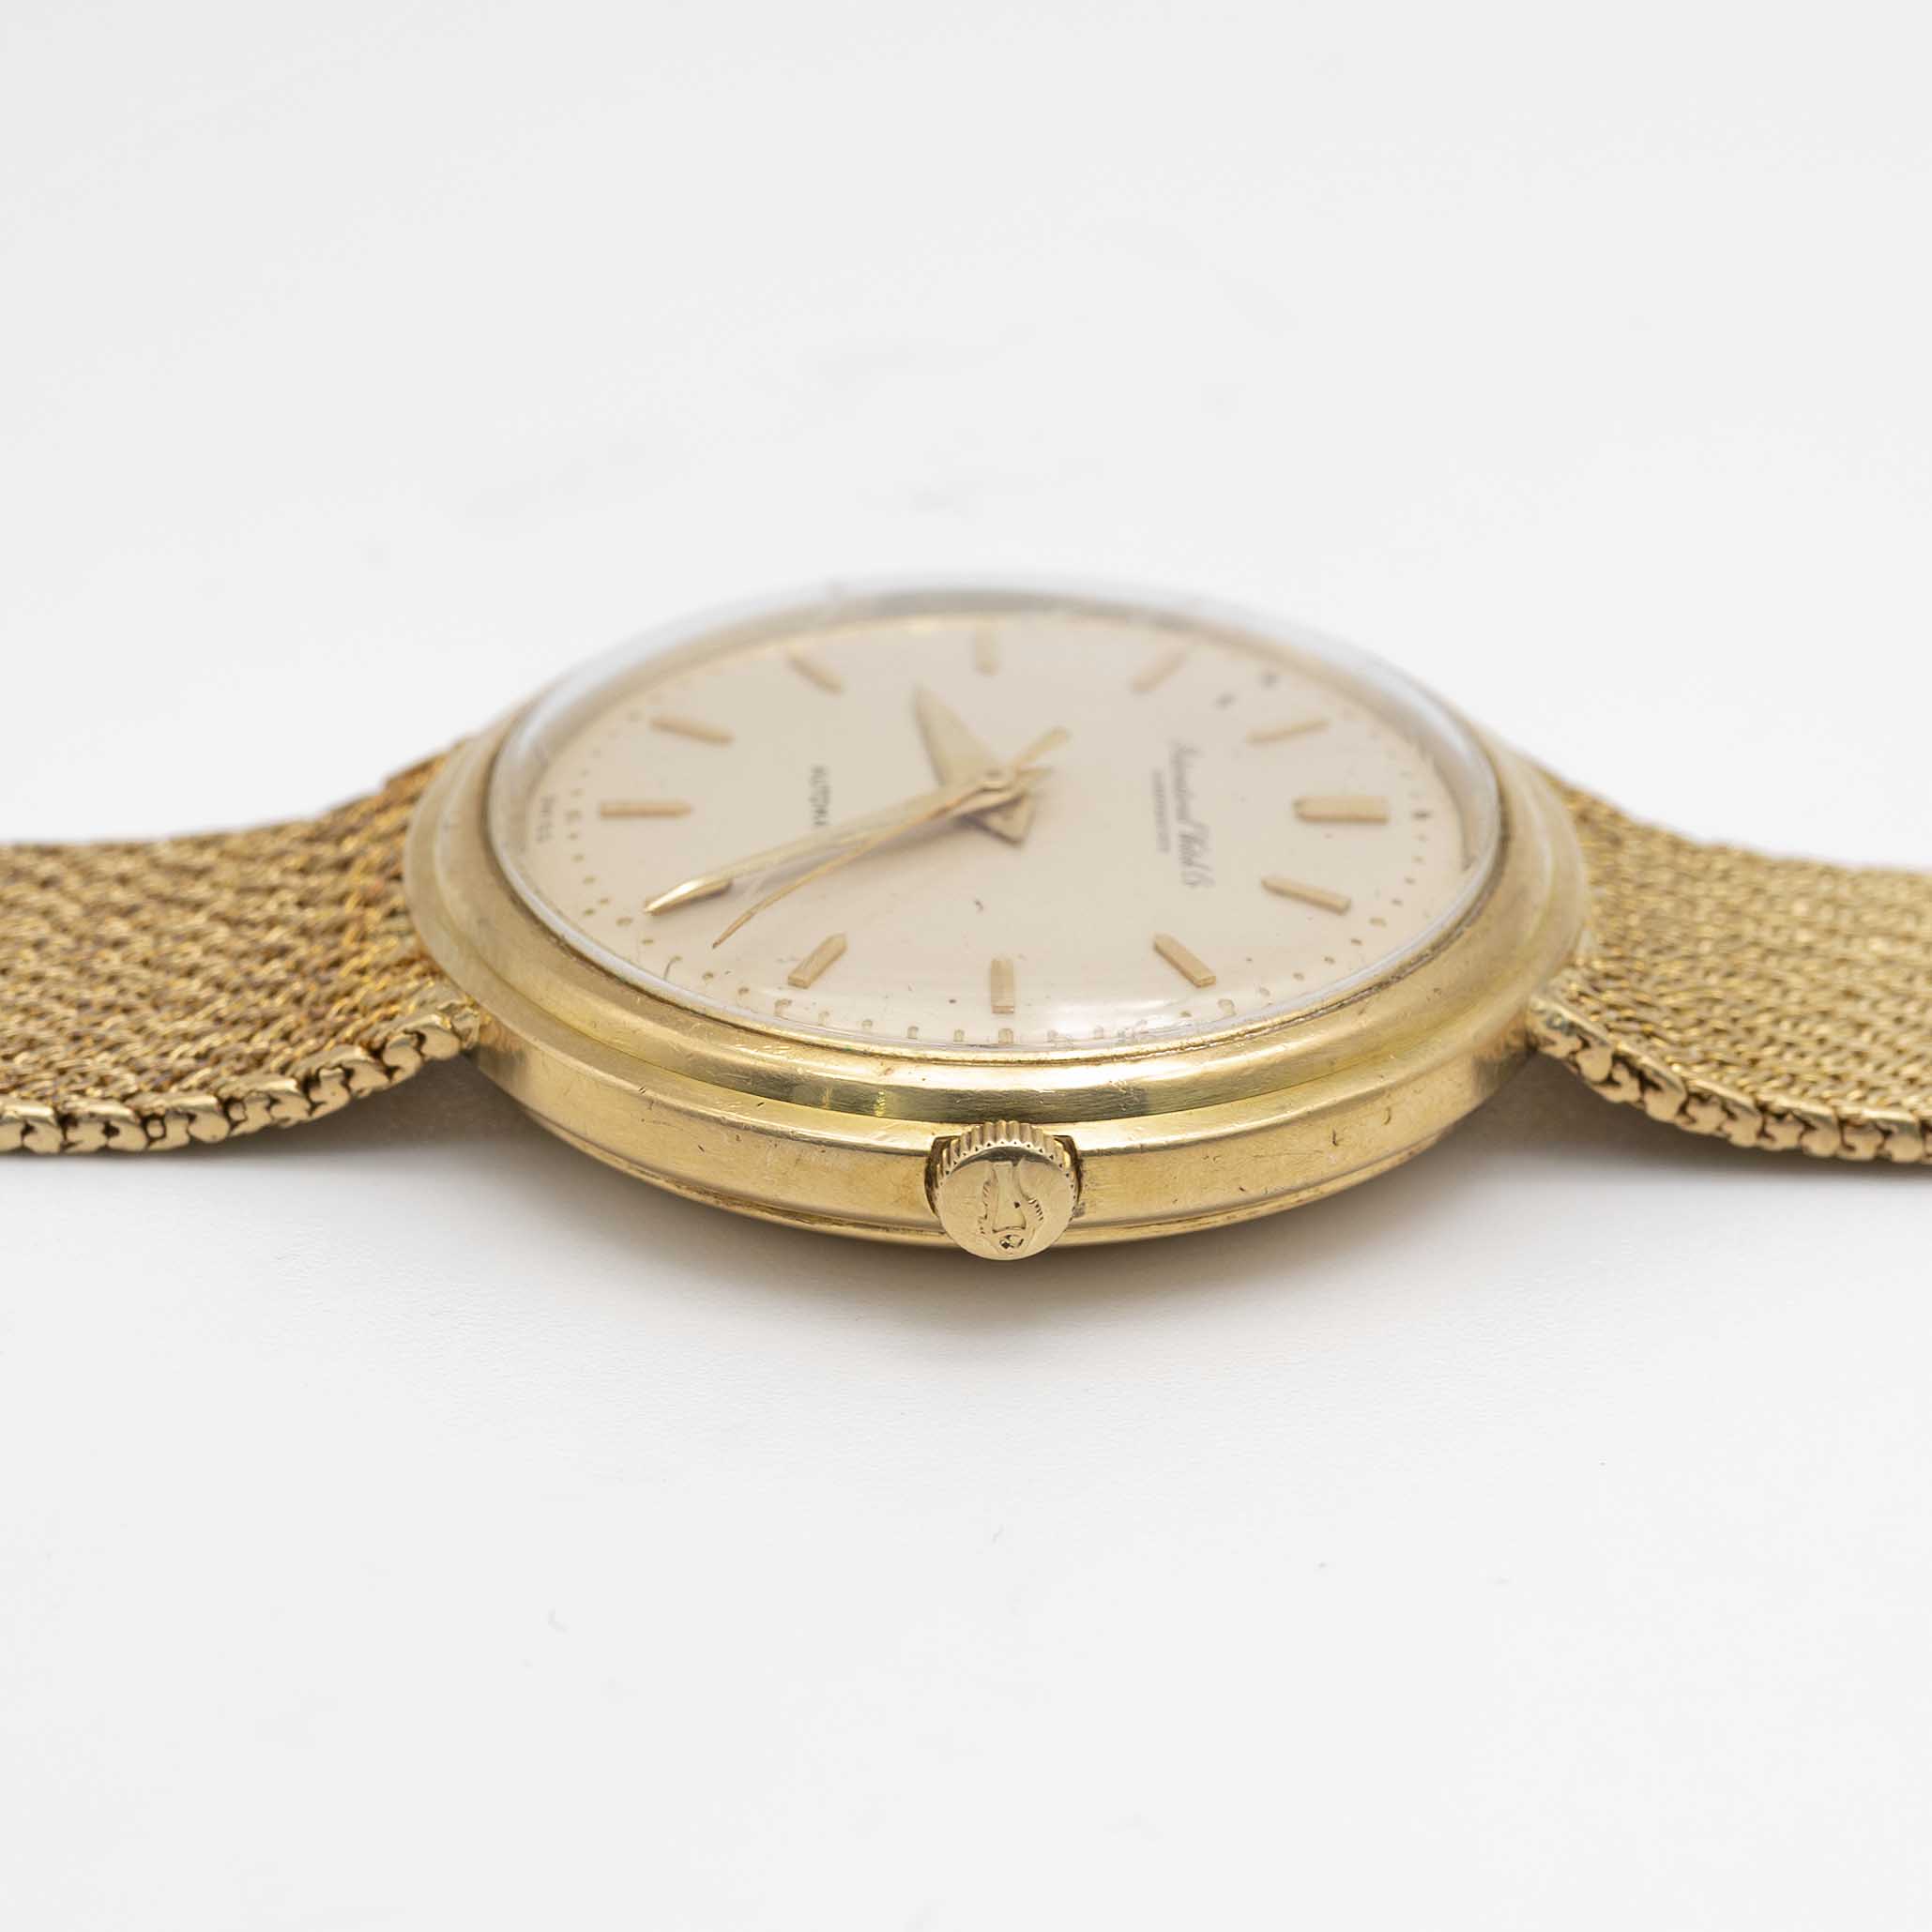 A GENTLEMAN'S 18K SOLID YELLOW GOLD IWC AUTOMATIC BRACELET WATCH CIRCA 1970s Movement: 21J, - Image 7 of 9